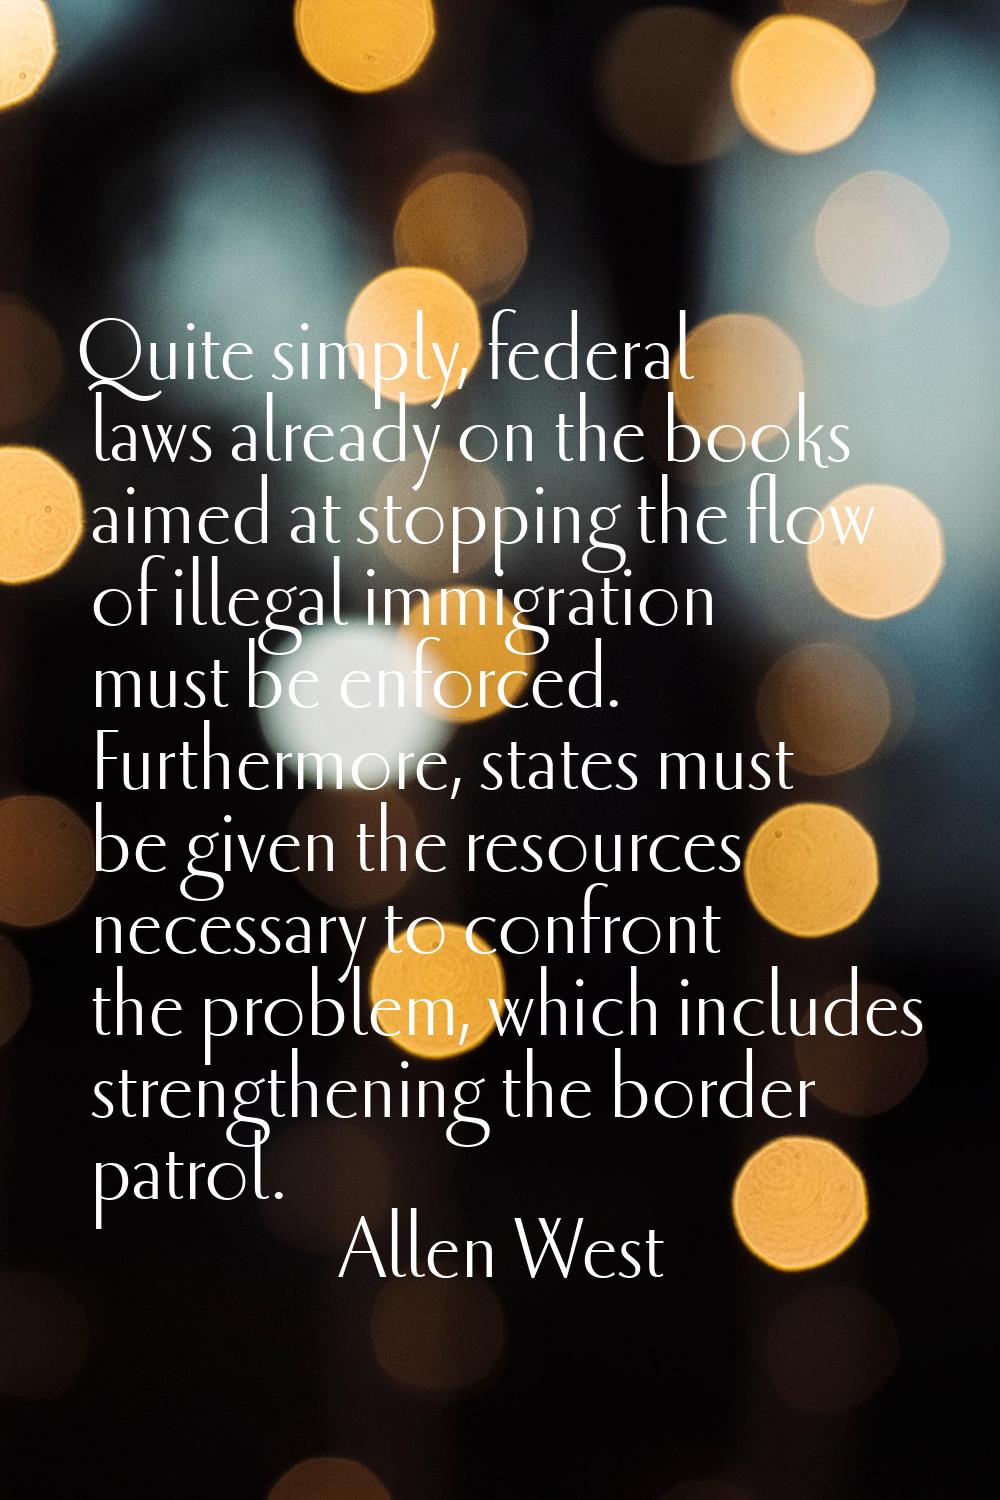 Quite simply, federal laws already on the books aimed at stopping the flow of illegal immigration m